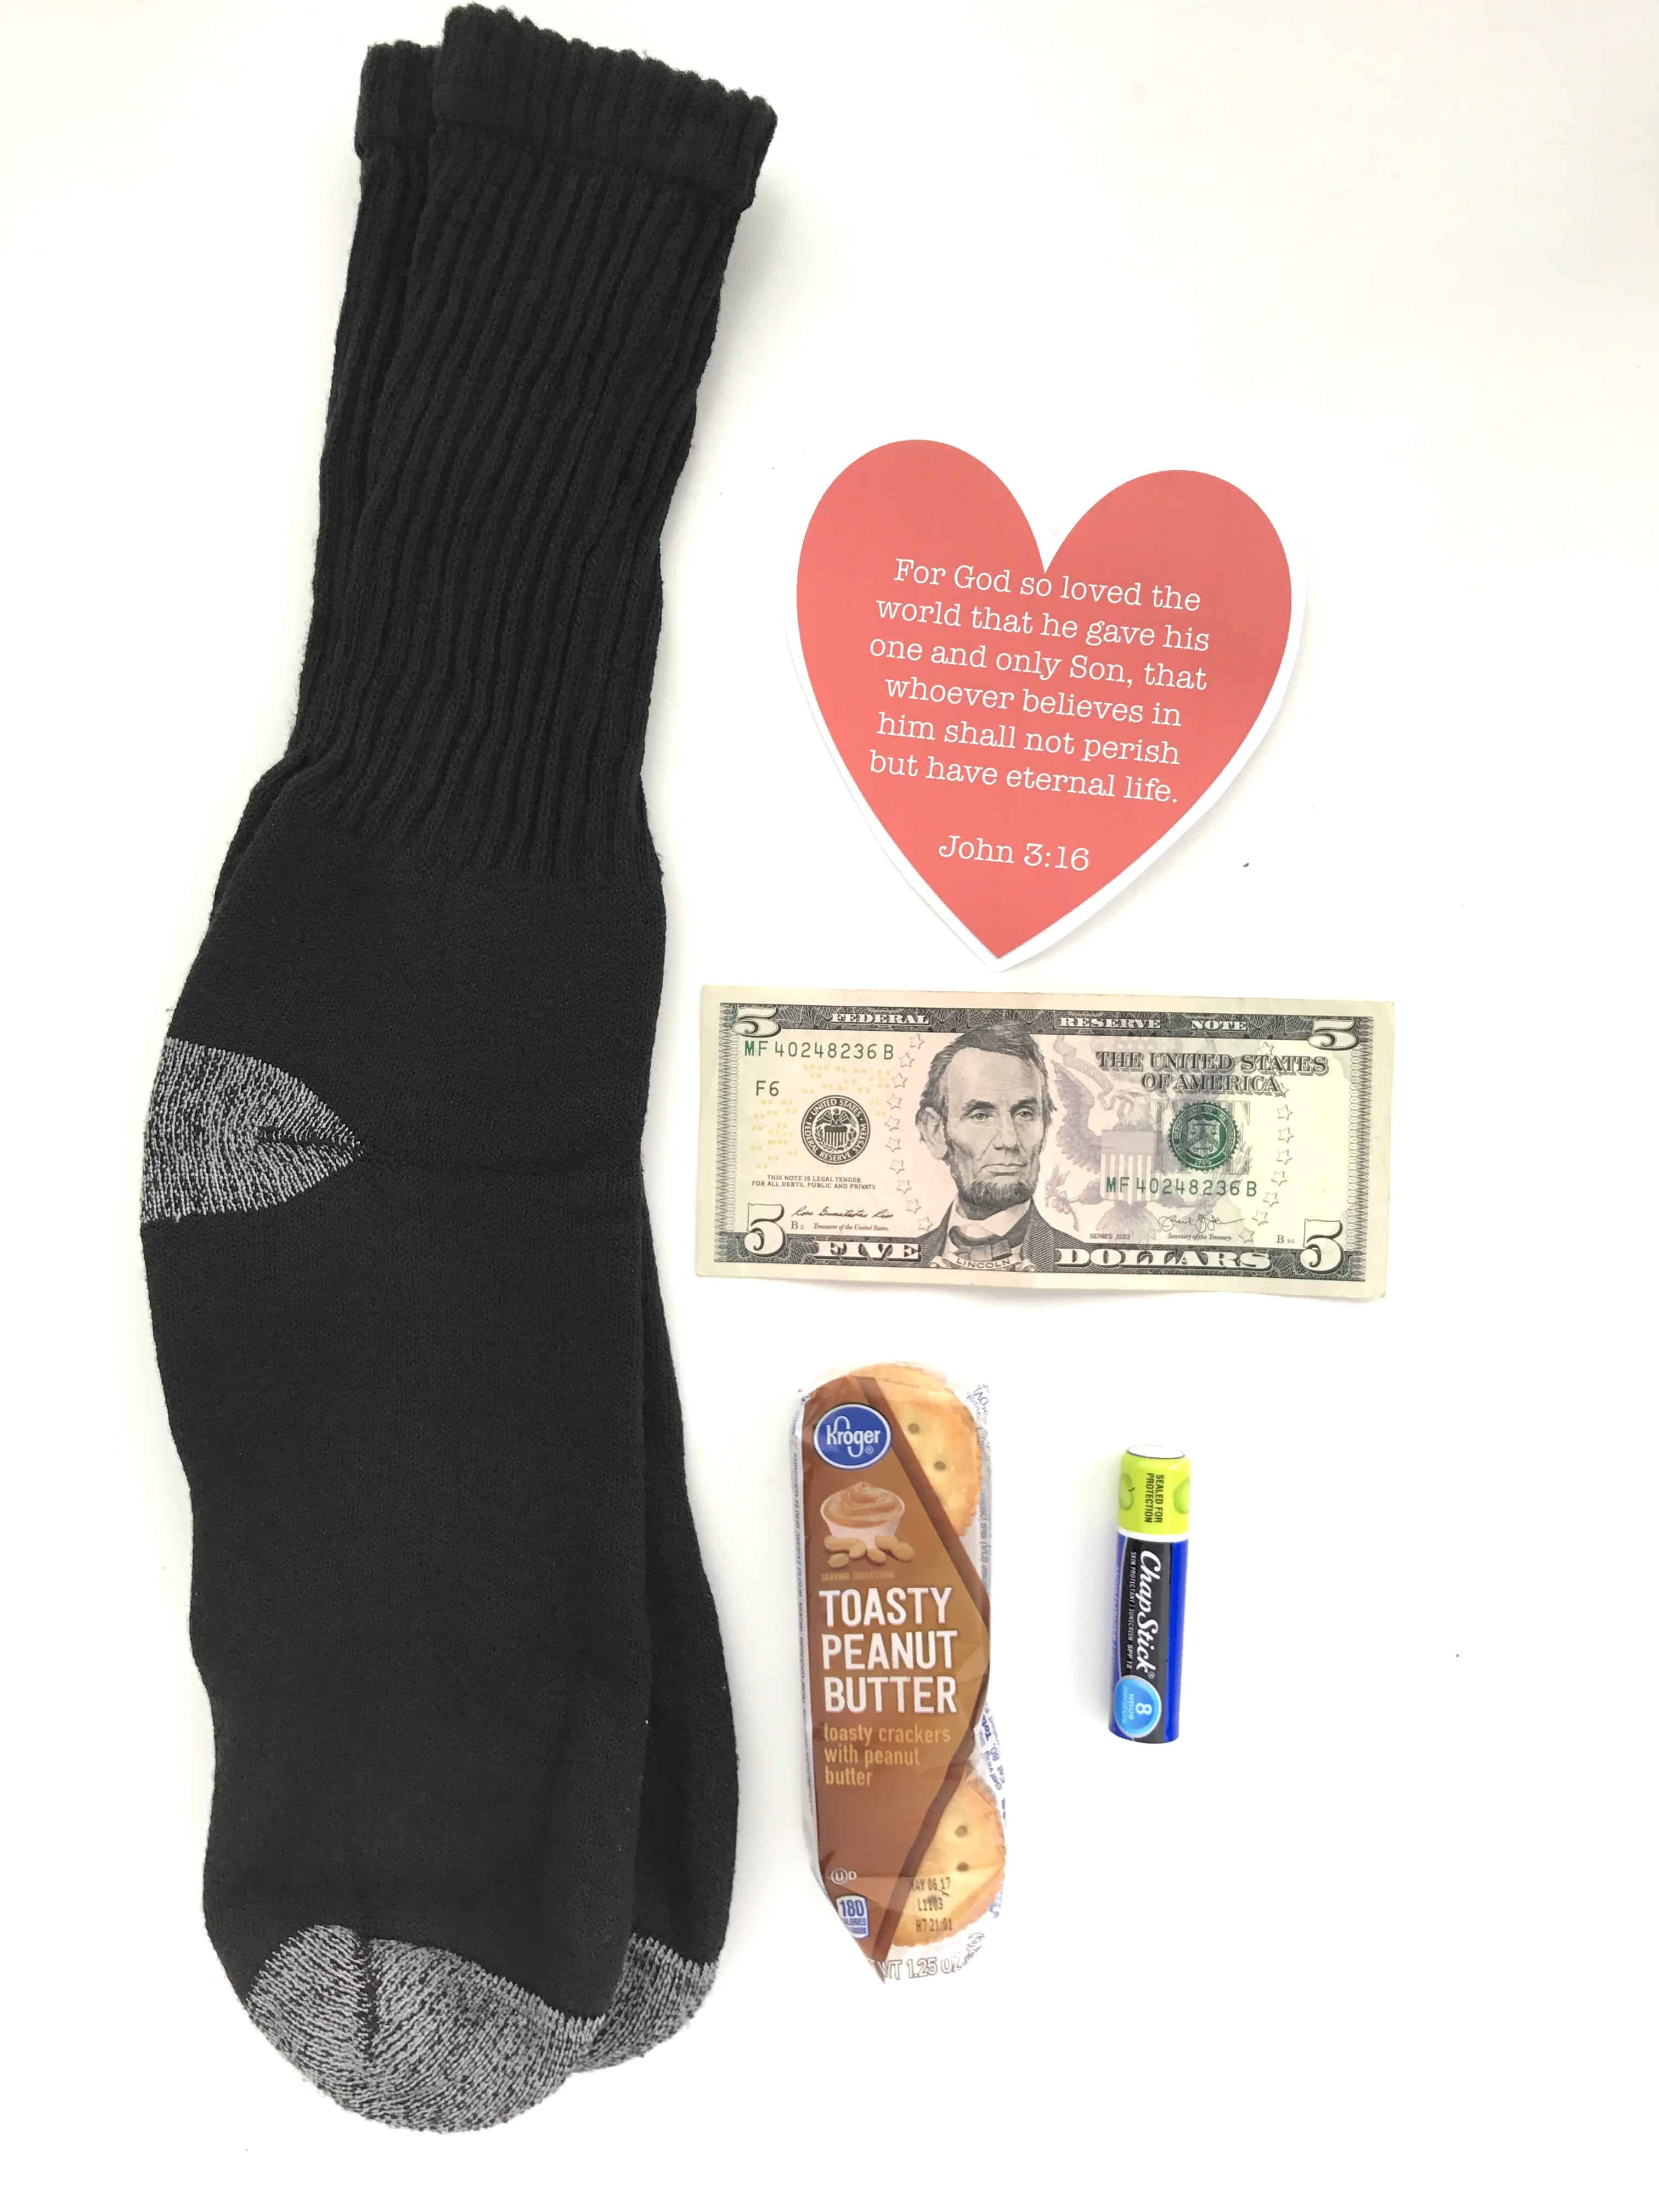 Contents of Mini Blessing Bags for February